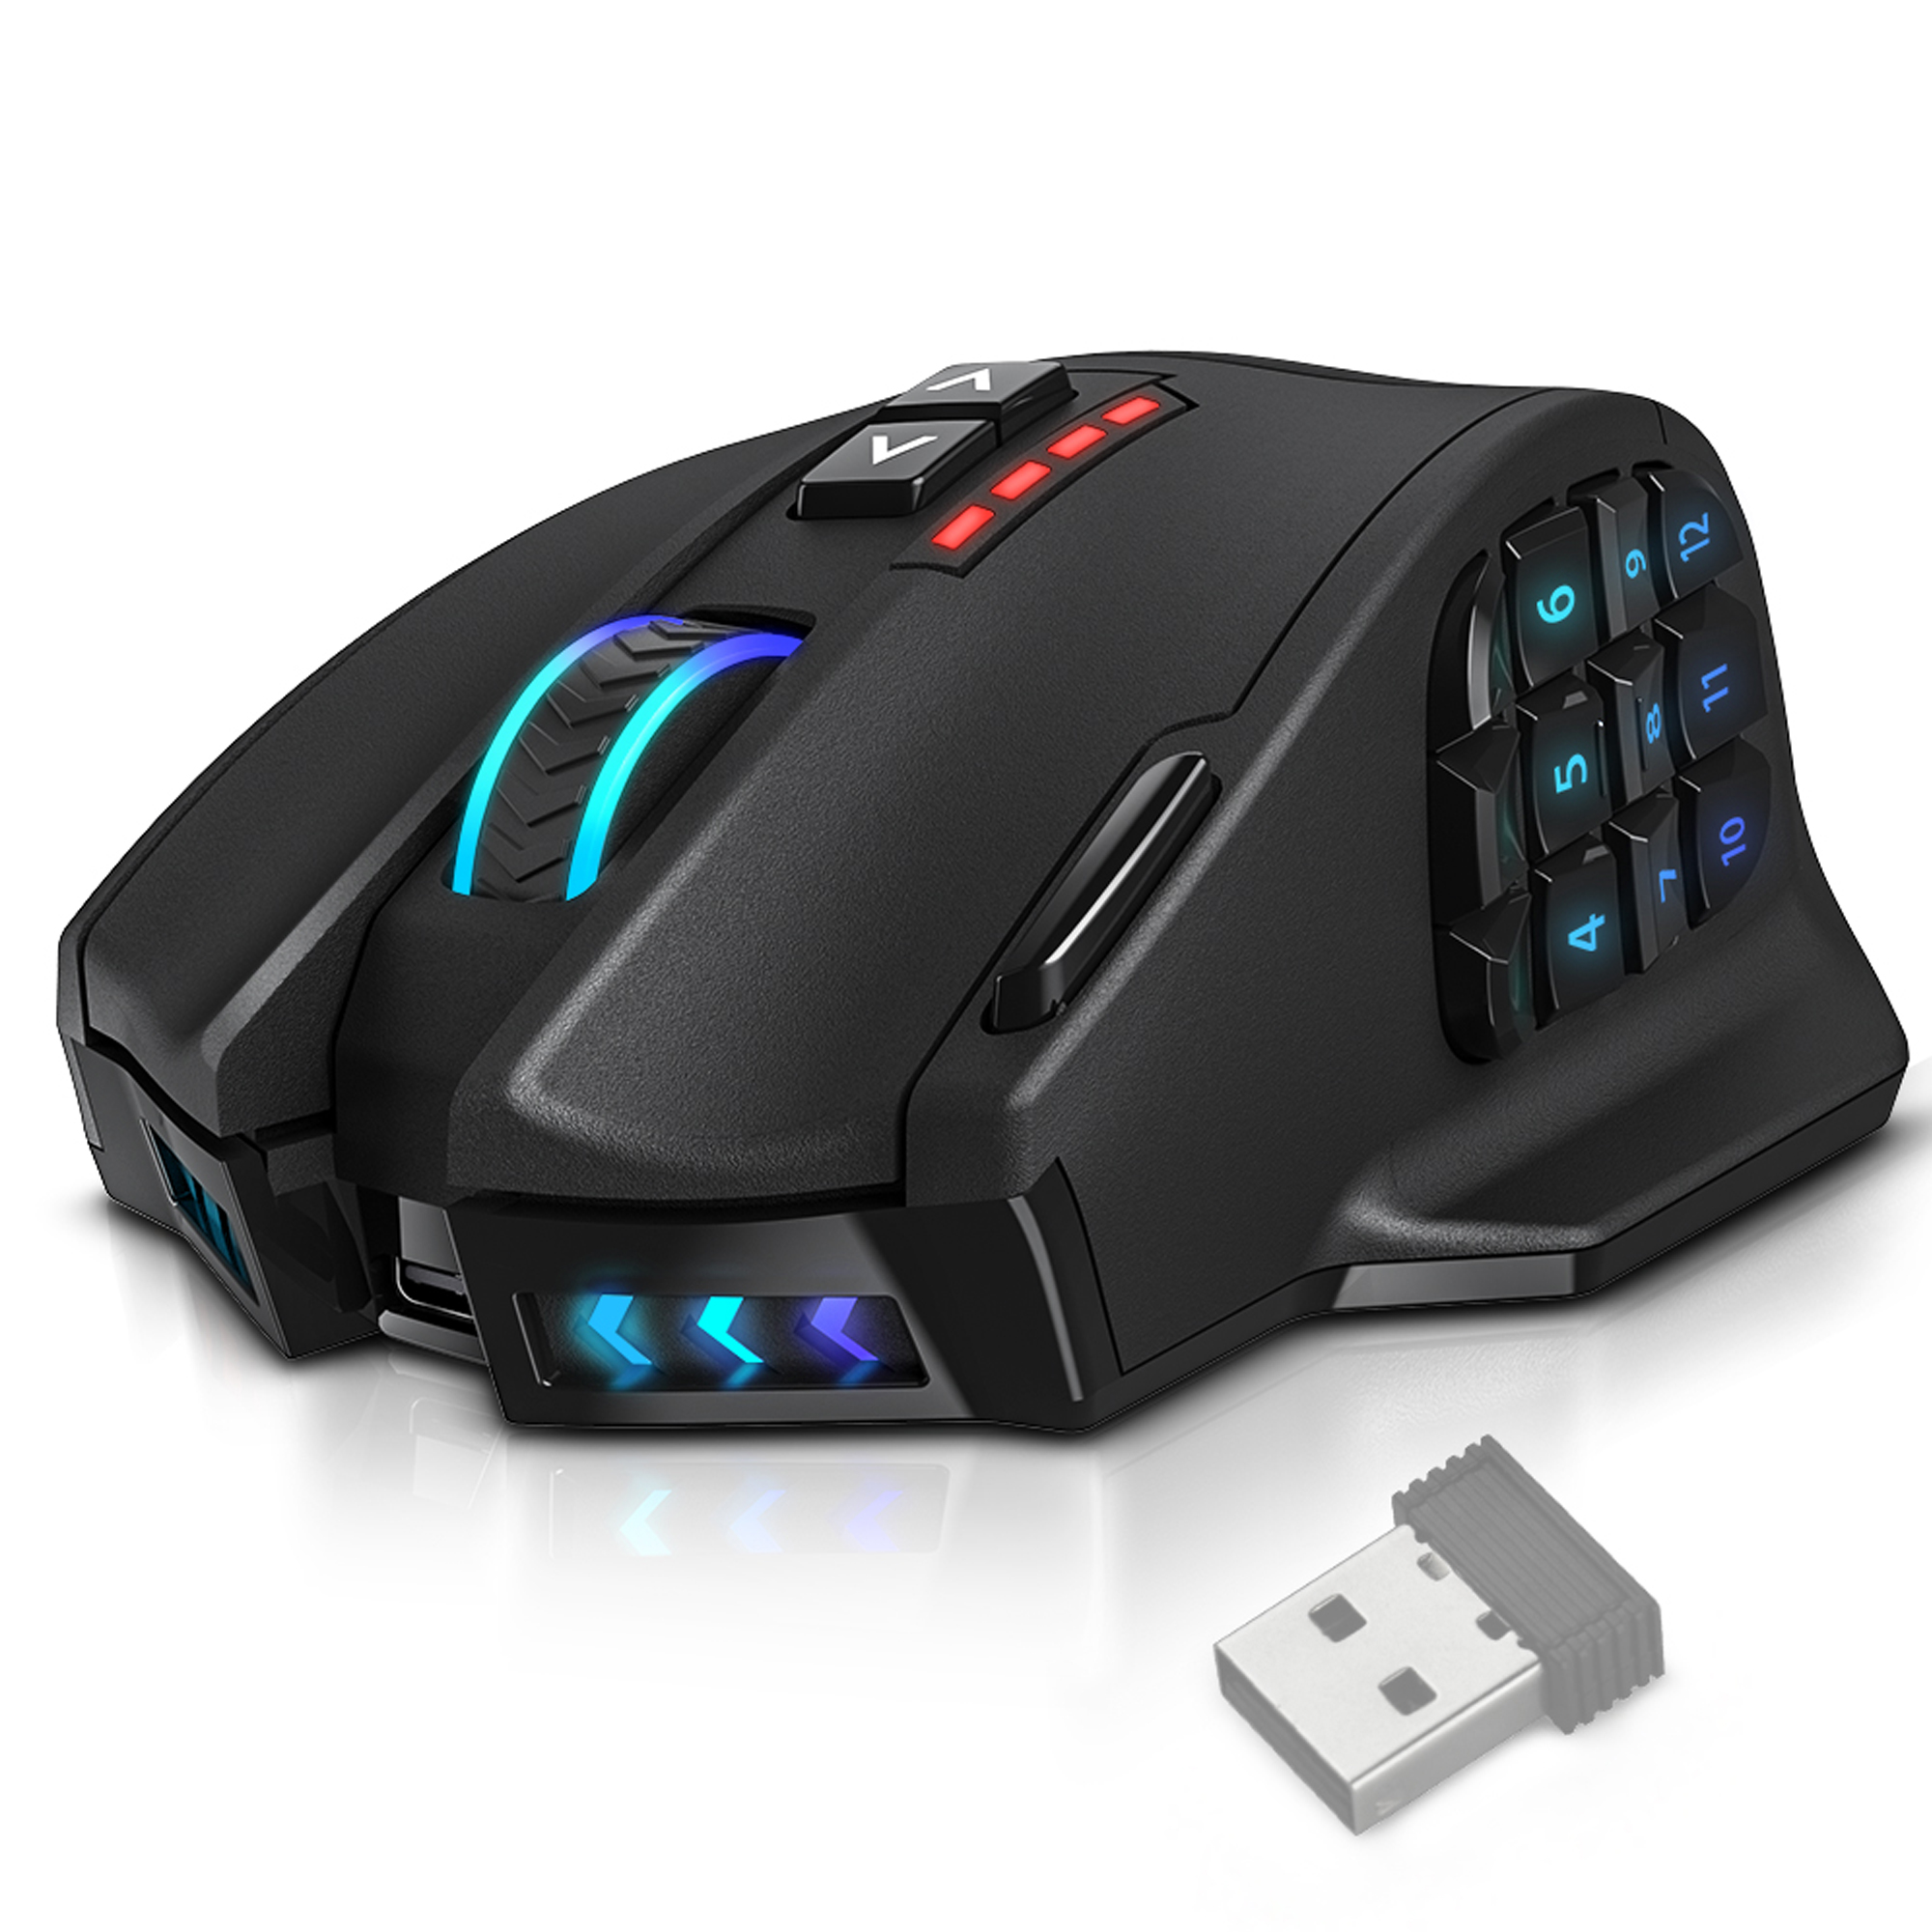 VenusPro RGB Wireless Gaming Mouse